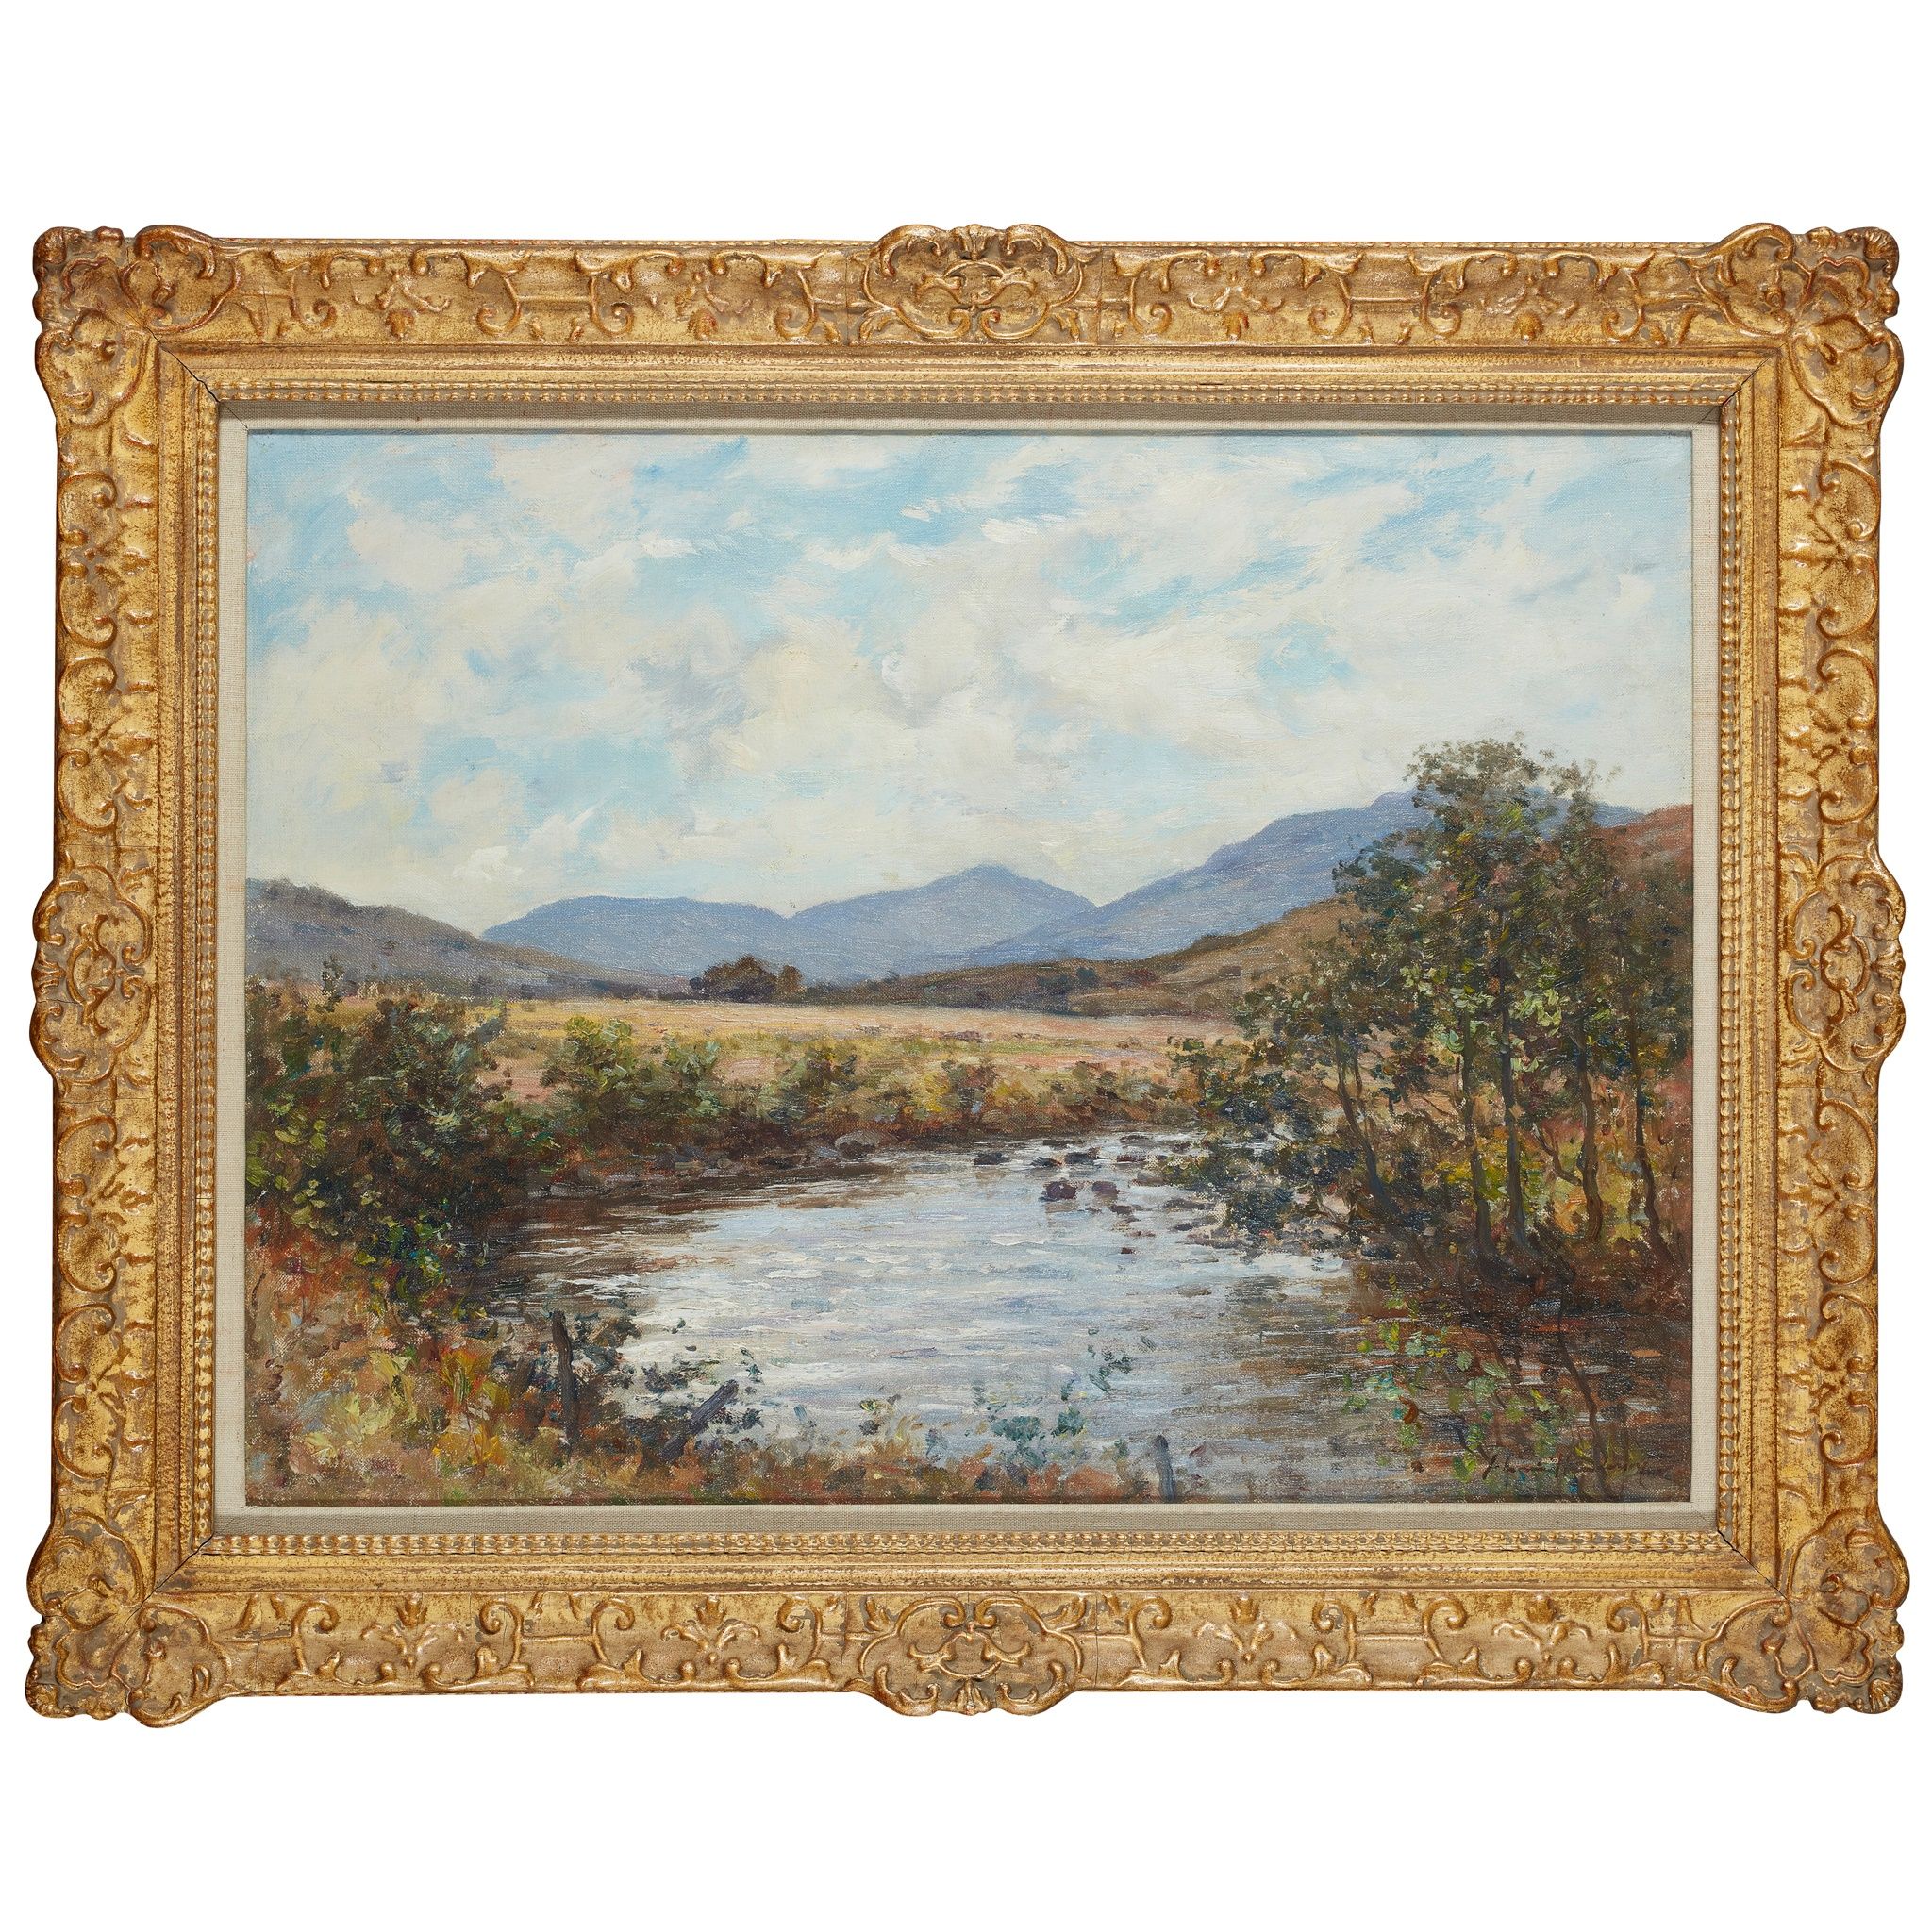 JOSEPH MORRIS HENDERSON R.S.A (SCOTTISH 1864-1936) HIGHLAND STREAM WITH DISTANT HILLS - Image 2 of 3